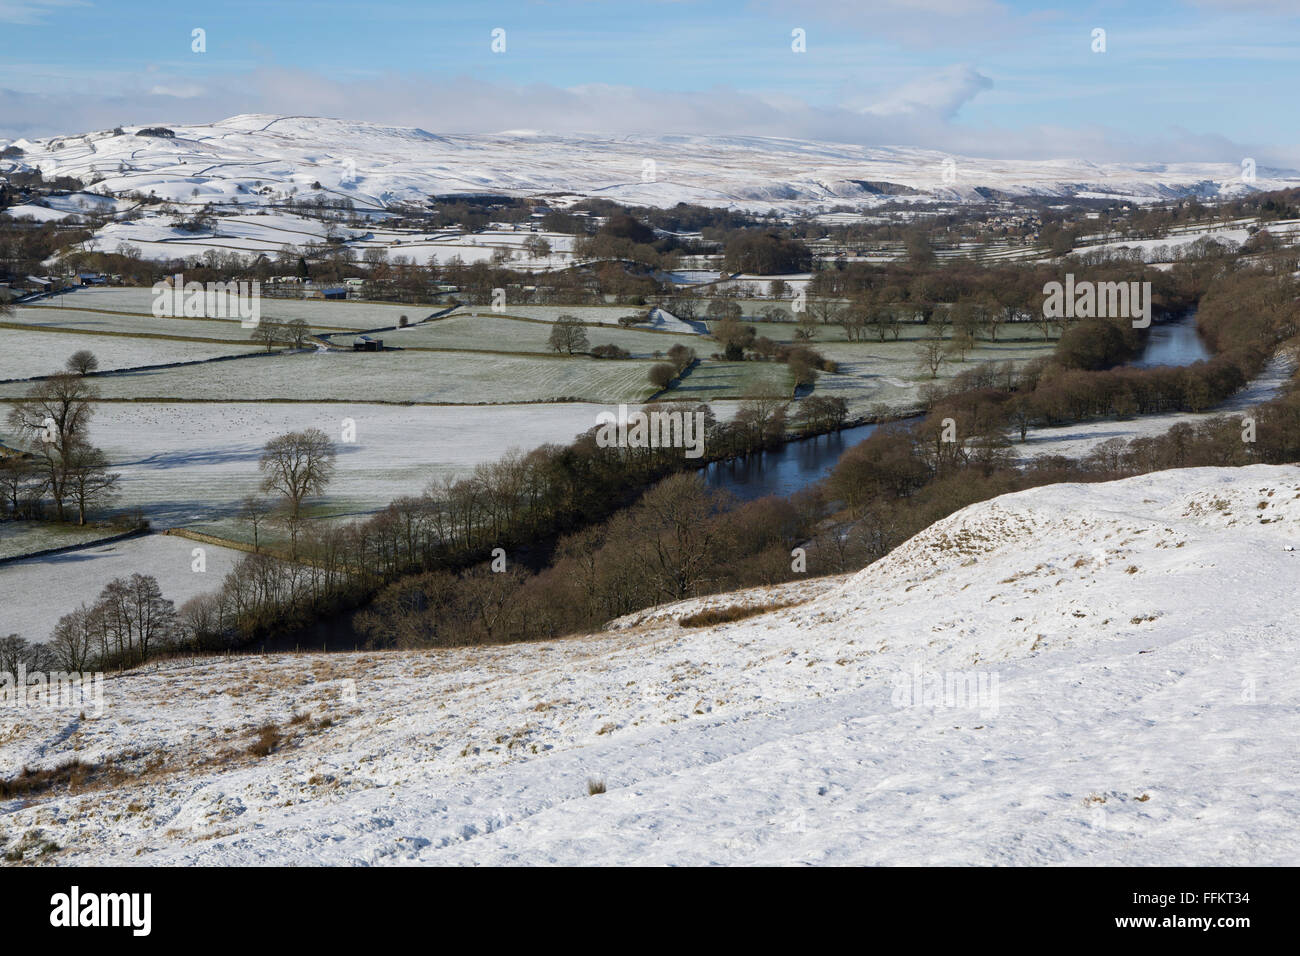 Snowy countryside at Upper Teesdale in County Durham, England. The River Tees runs through the frame. Stock Photo